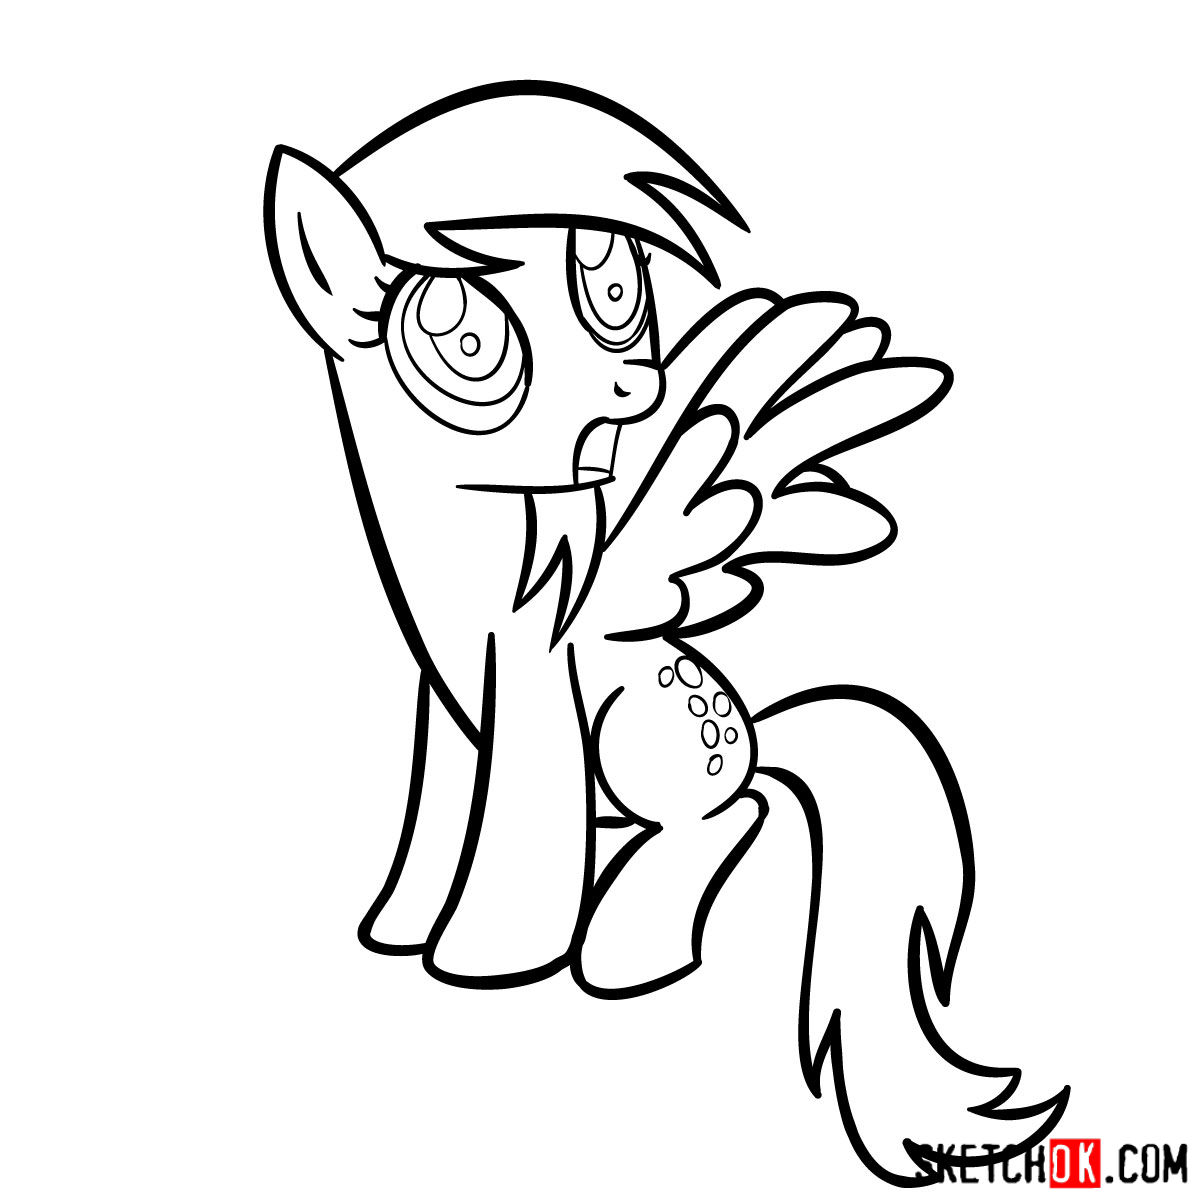 How to draw Derpy Hooves pegasus pony - step 11